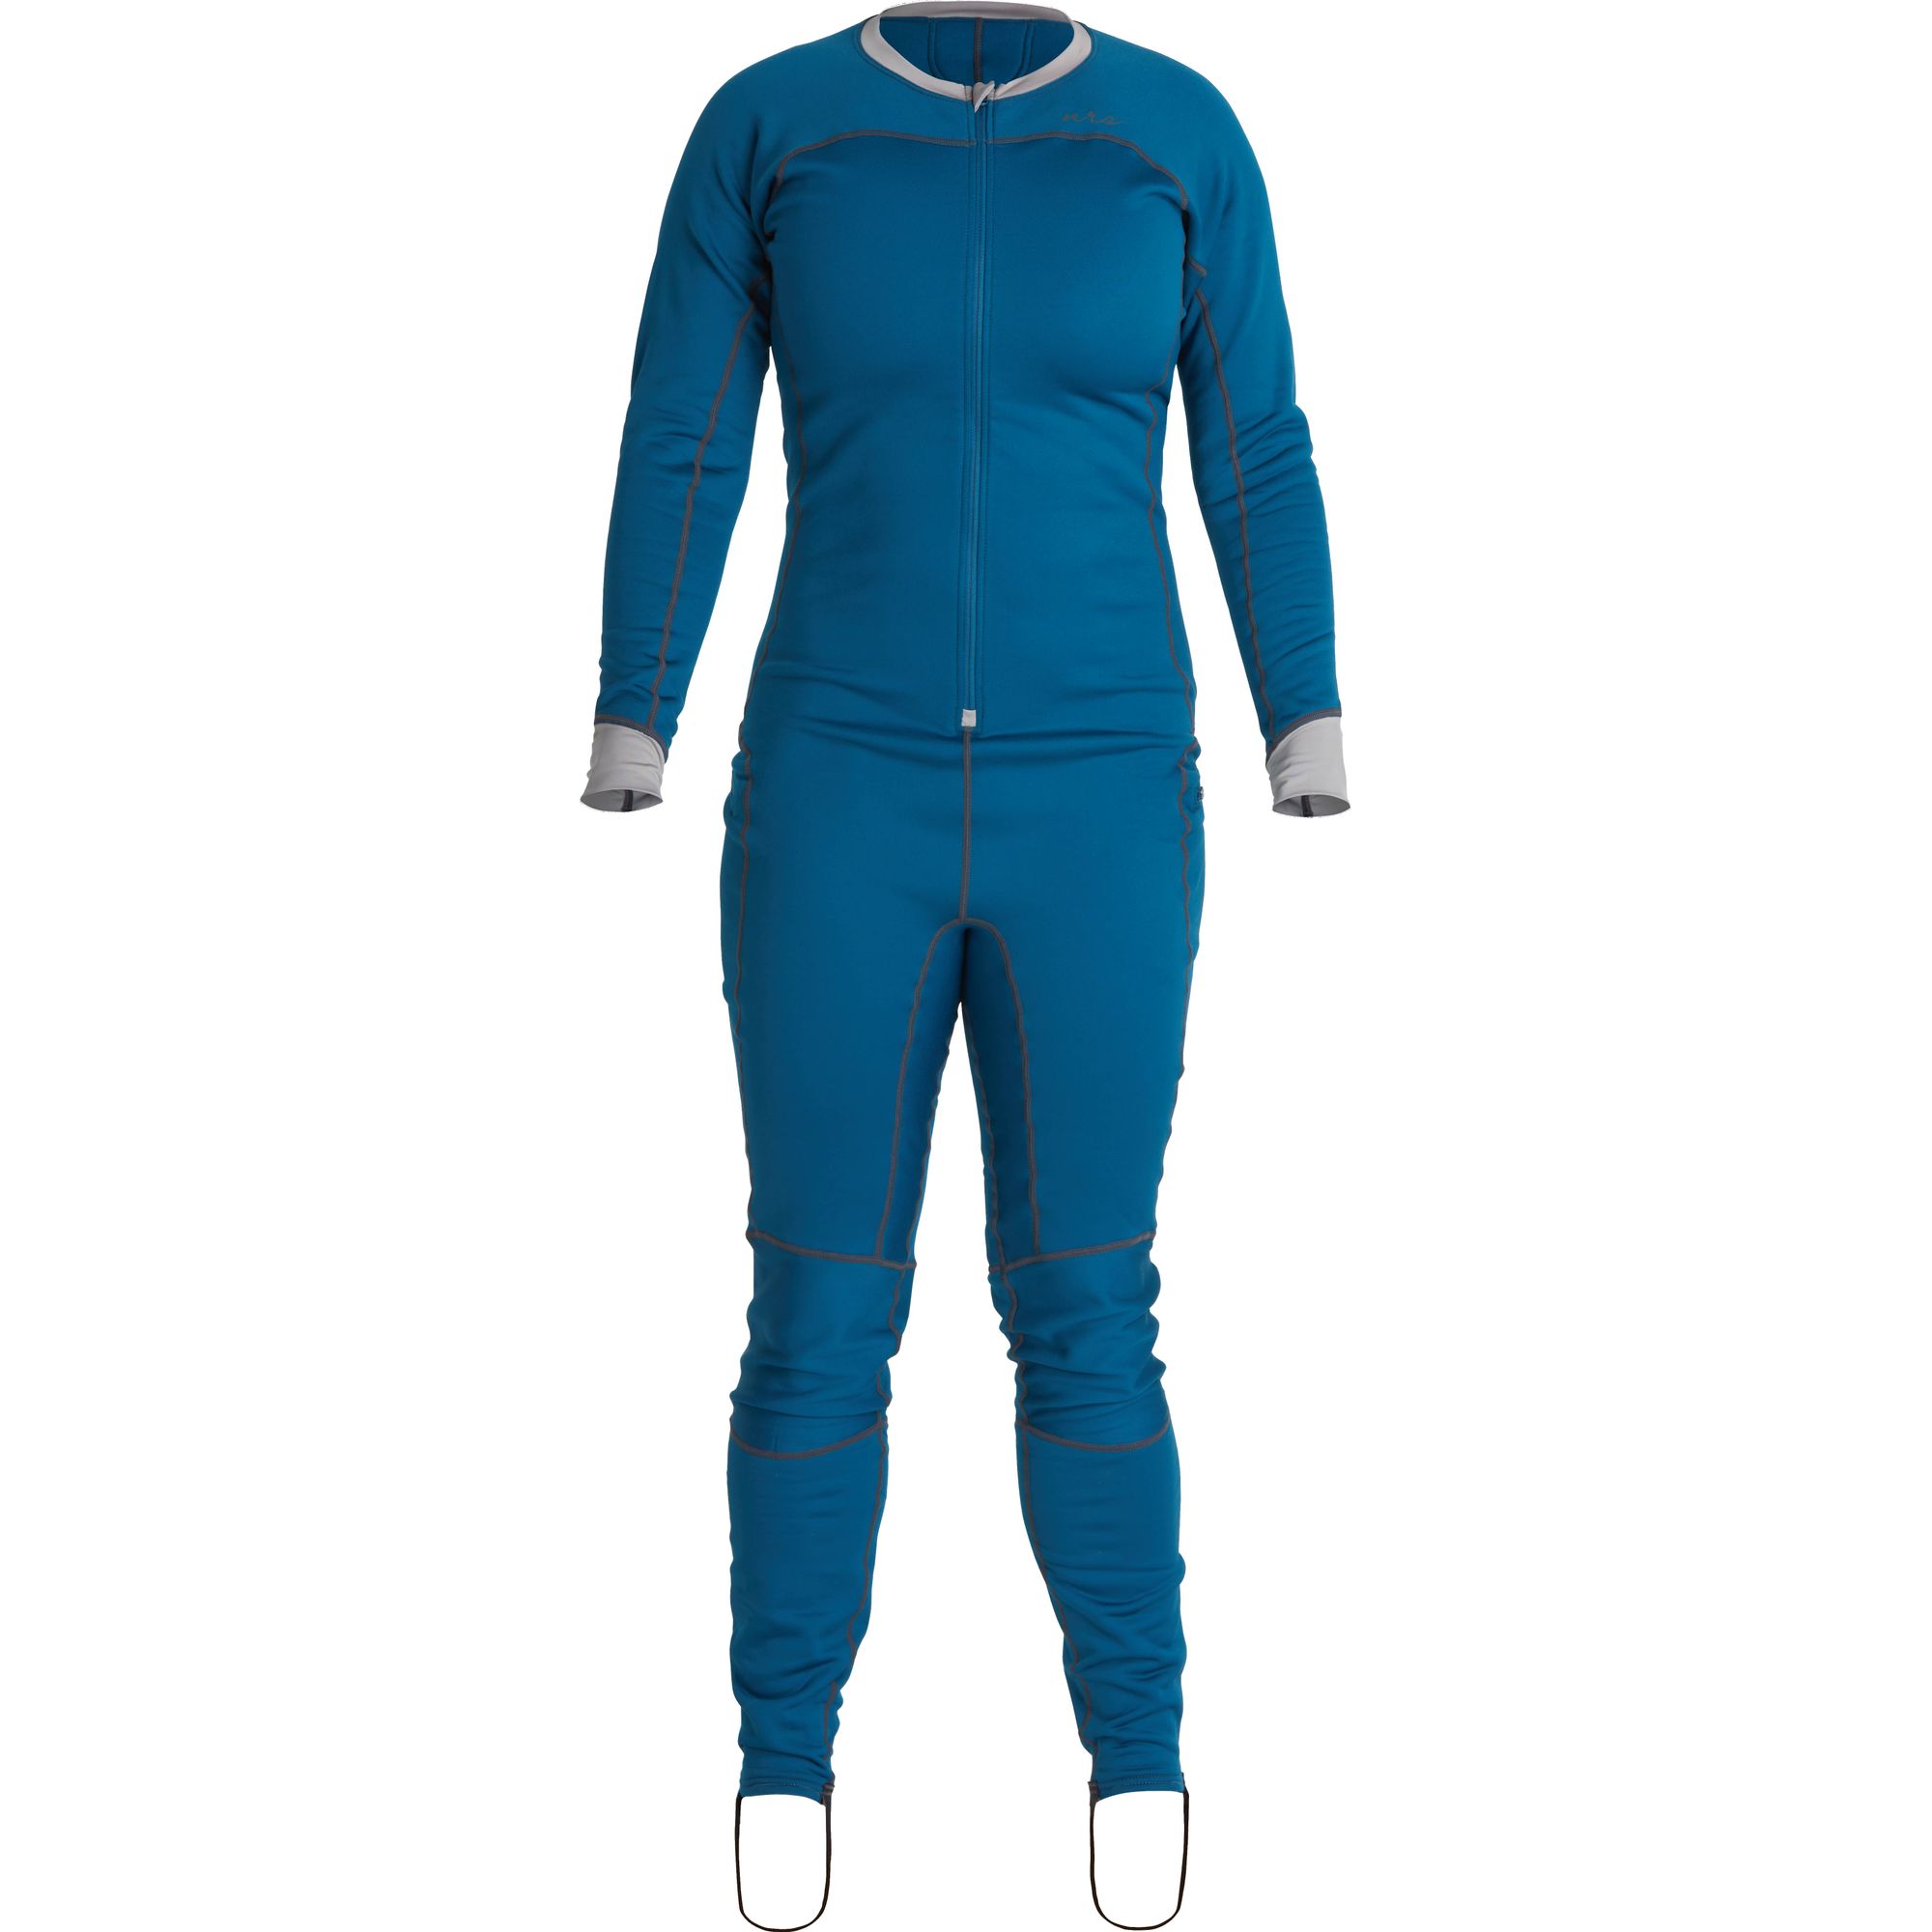 NRS Women's Expedition Weight Union Suit Fleece Anzug 